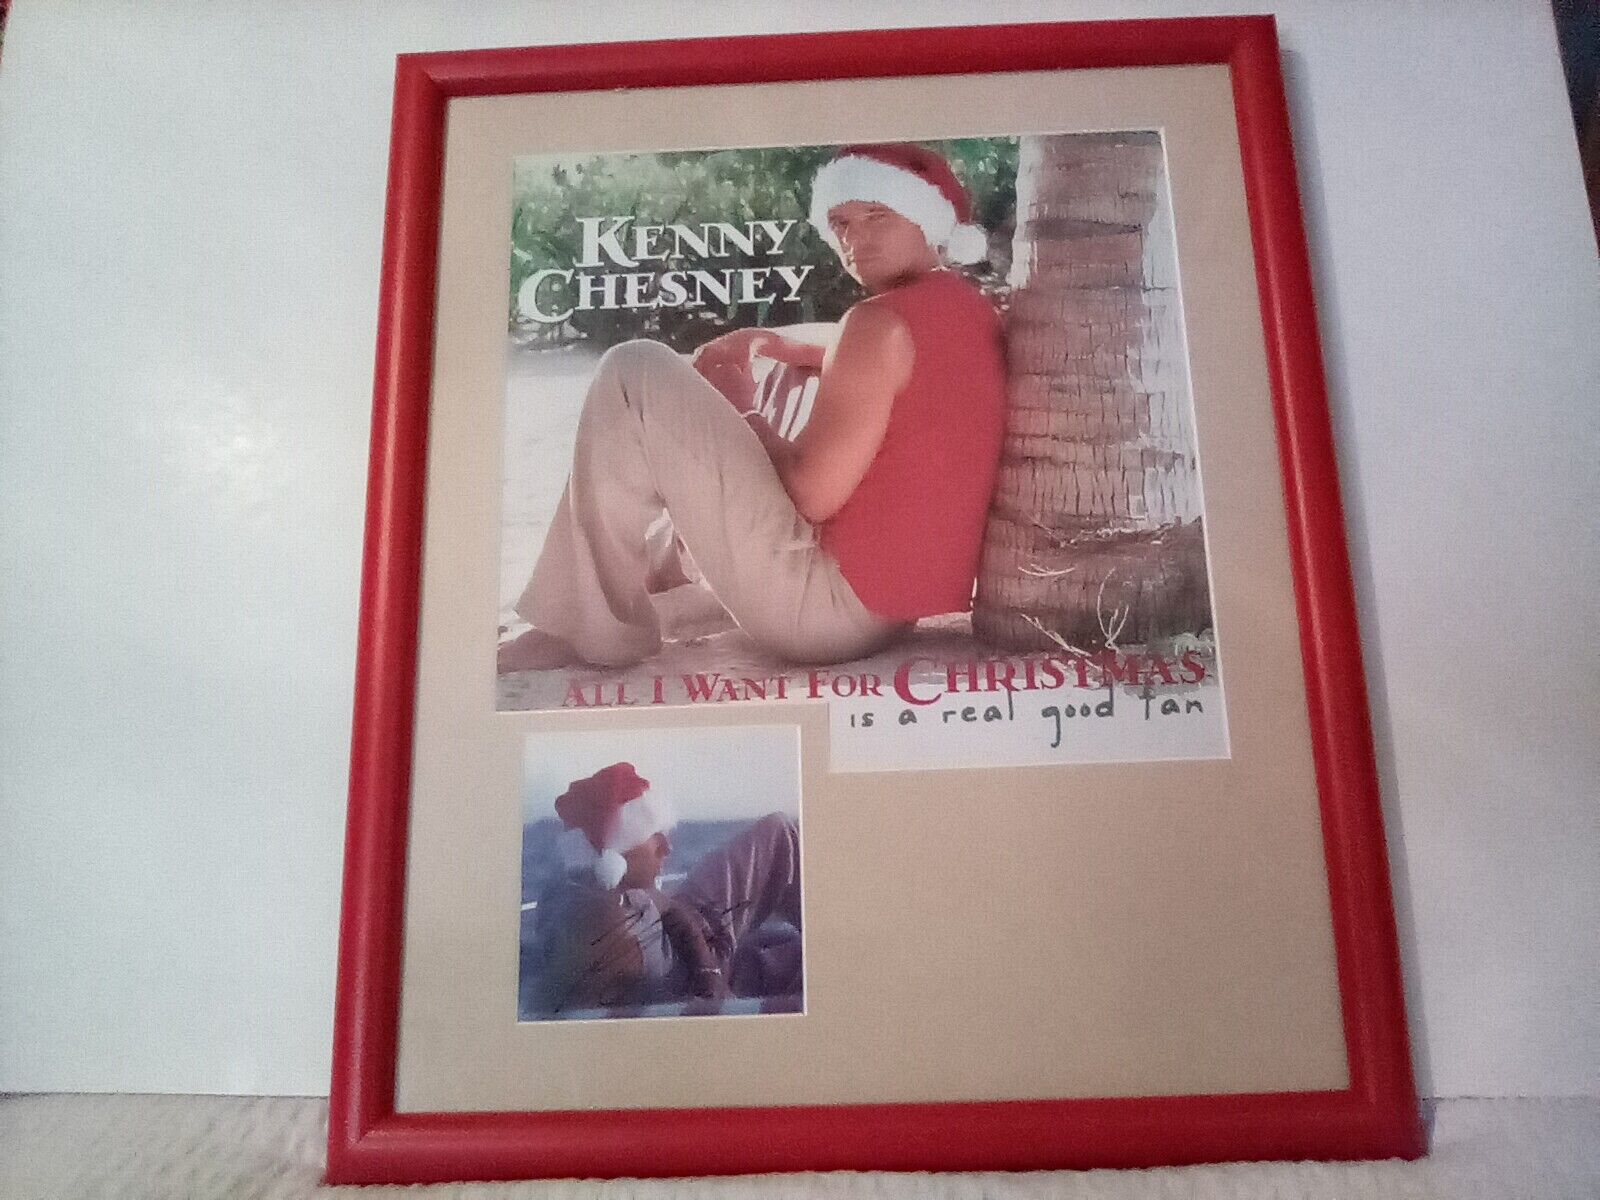 Kenny Chesney autographed framed All i Want for Christmas promo ad and CD cover